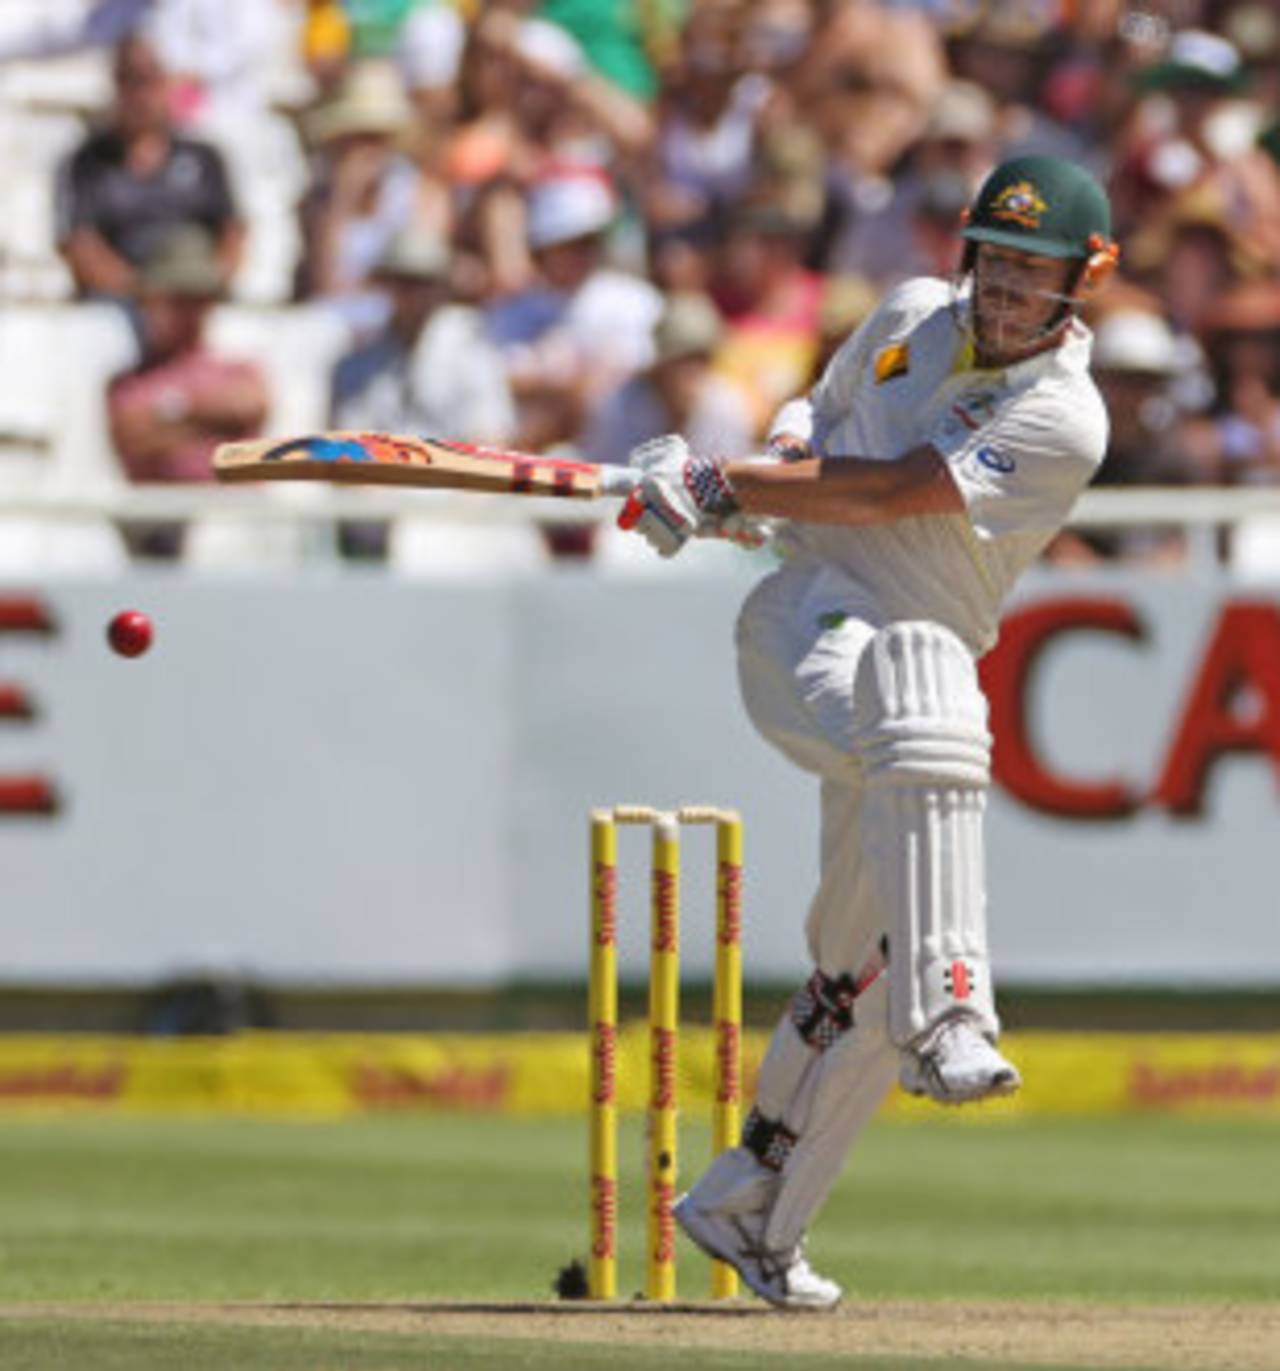 David Warner paid heed to his captain's advice by being a "tough bugger" to South Africa's bowlers&nbsp;&nbsp;&bull;&nbsp;&nbsp;Associated Press